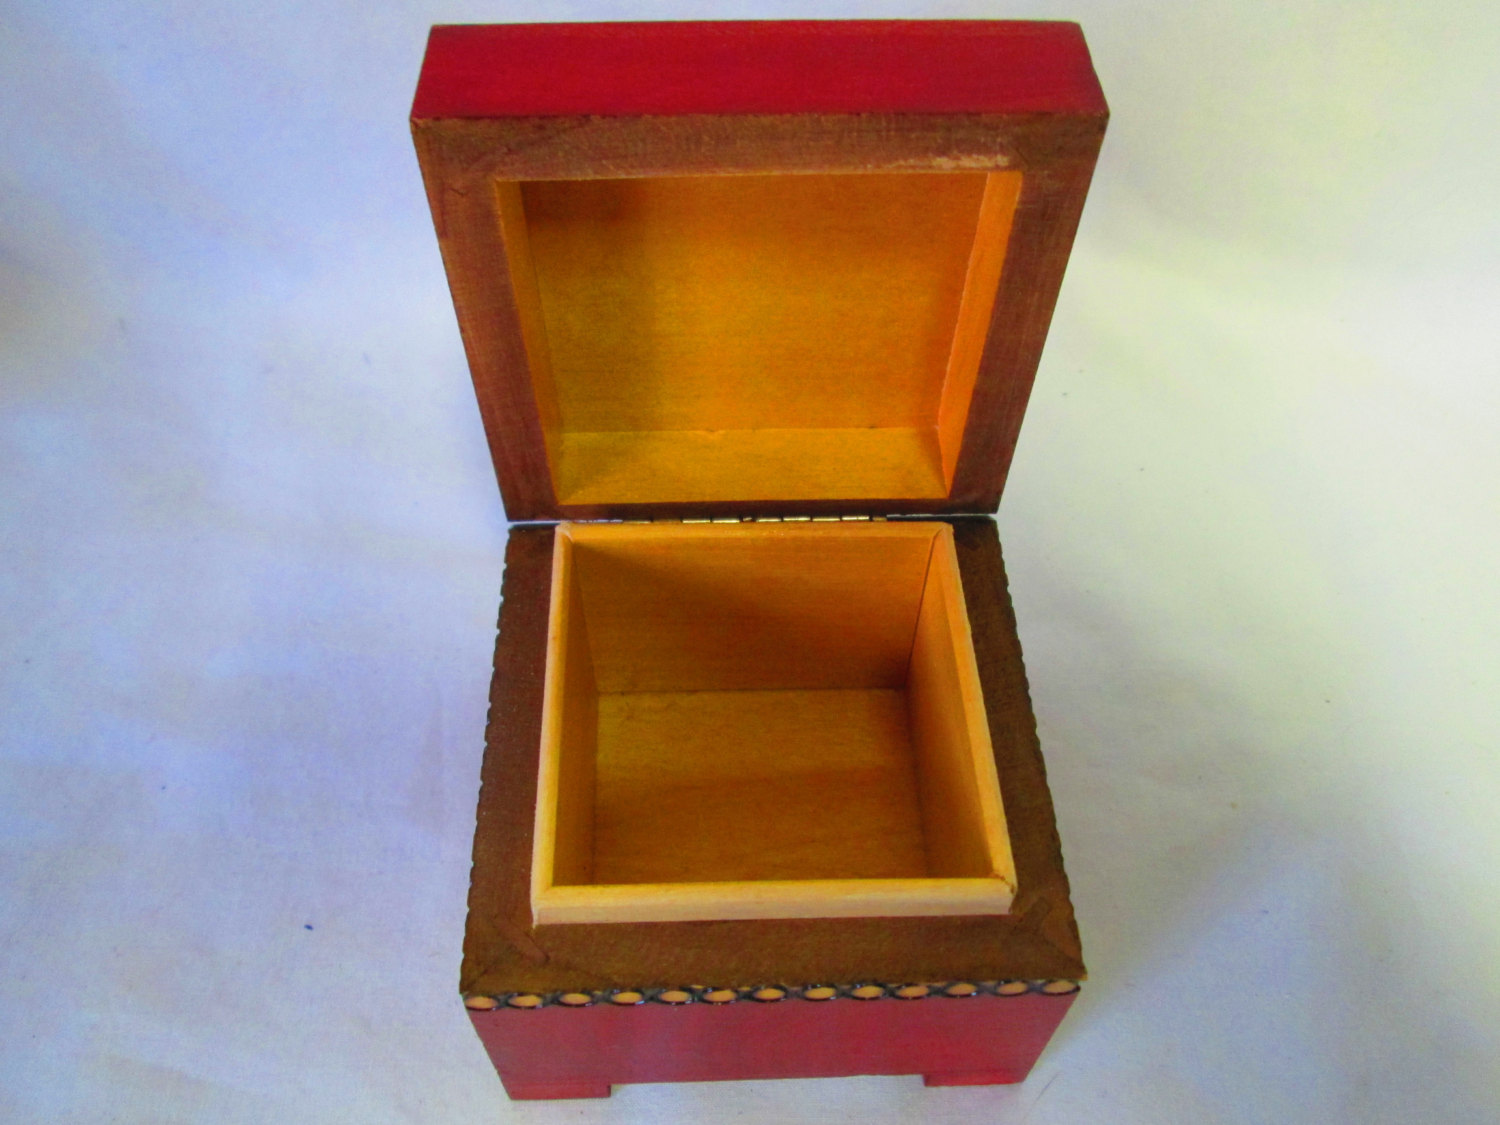 Small red jewelry box, with hinged lid